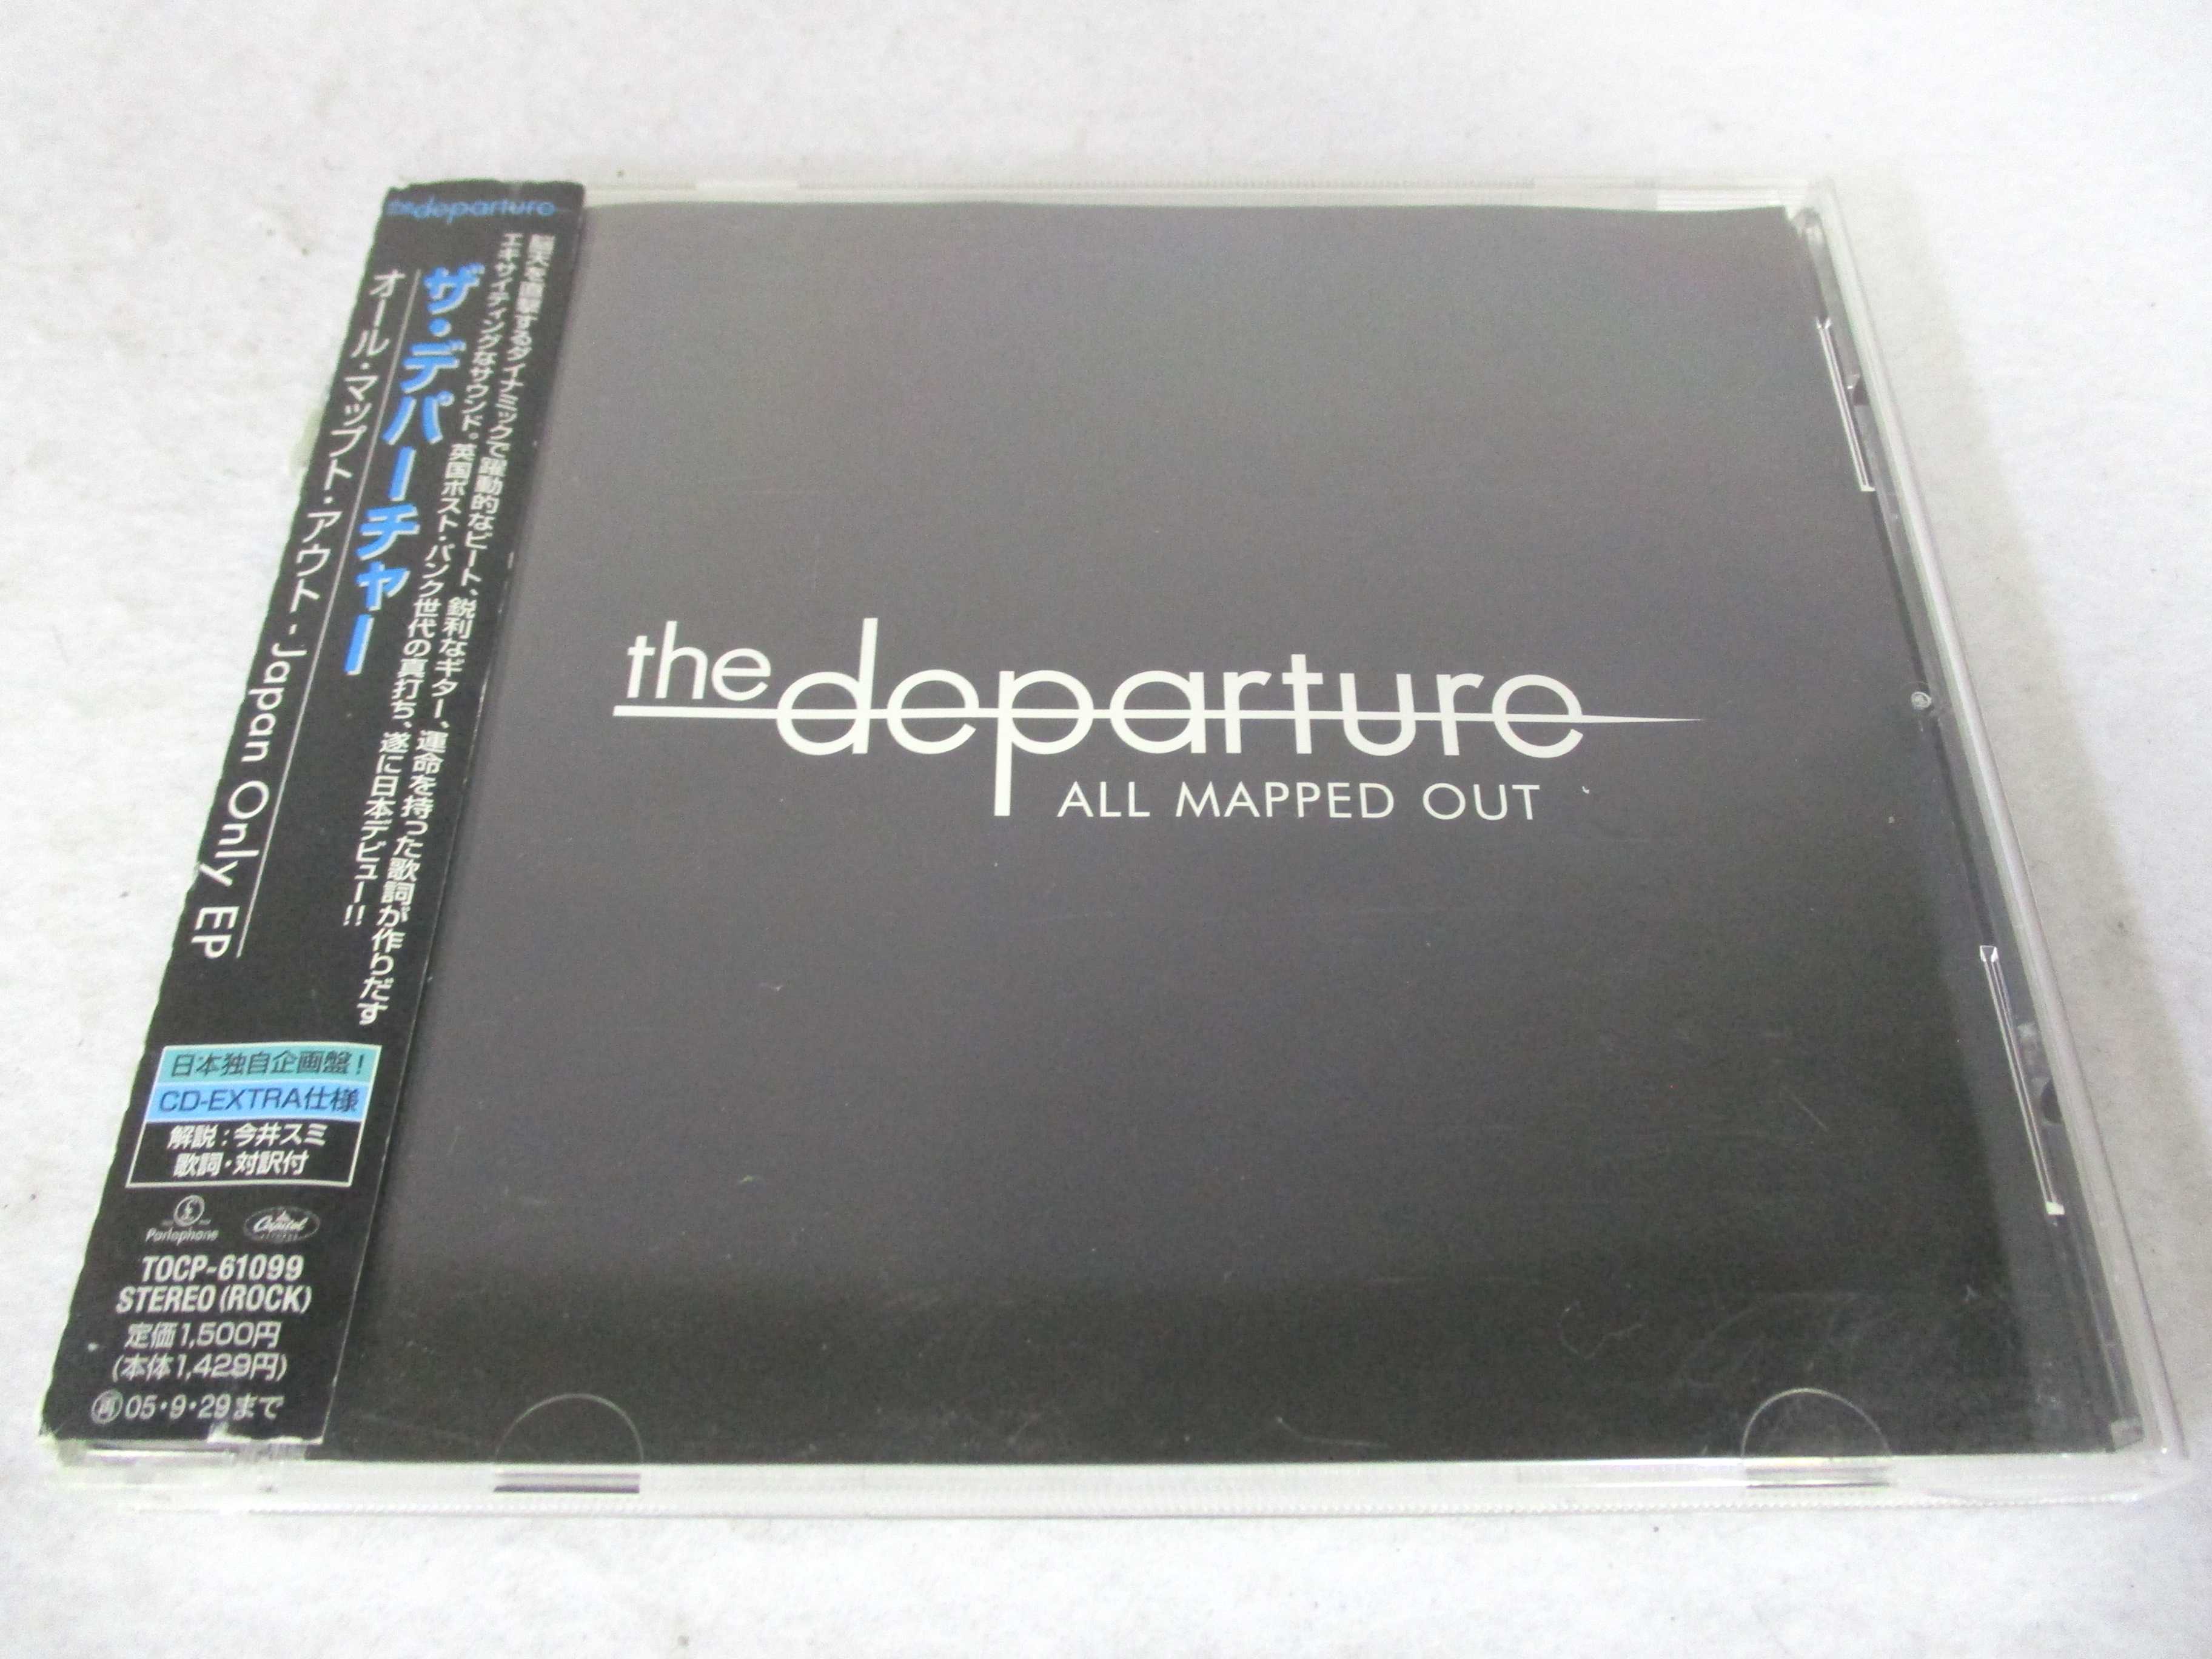 AC01787 yÁz yCDz I[E}bvgEAEg Japan Only EP/The Departure(UEfp[`[)